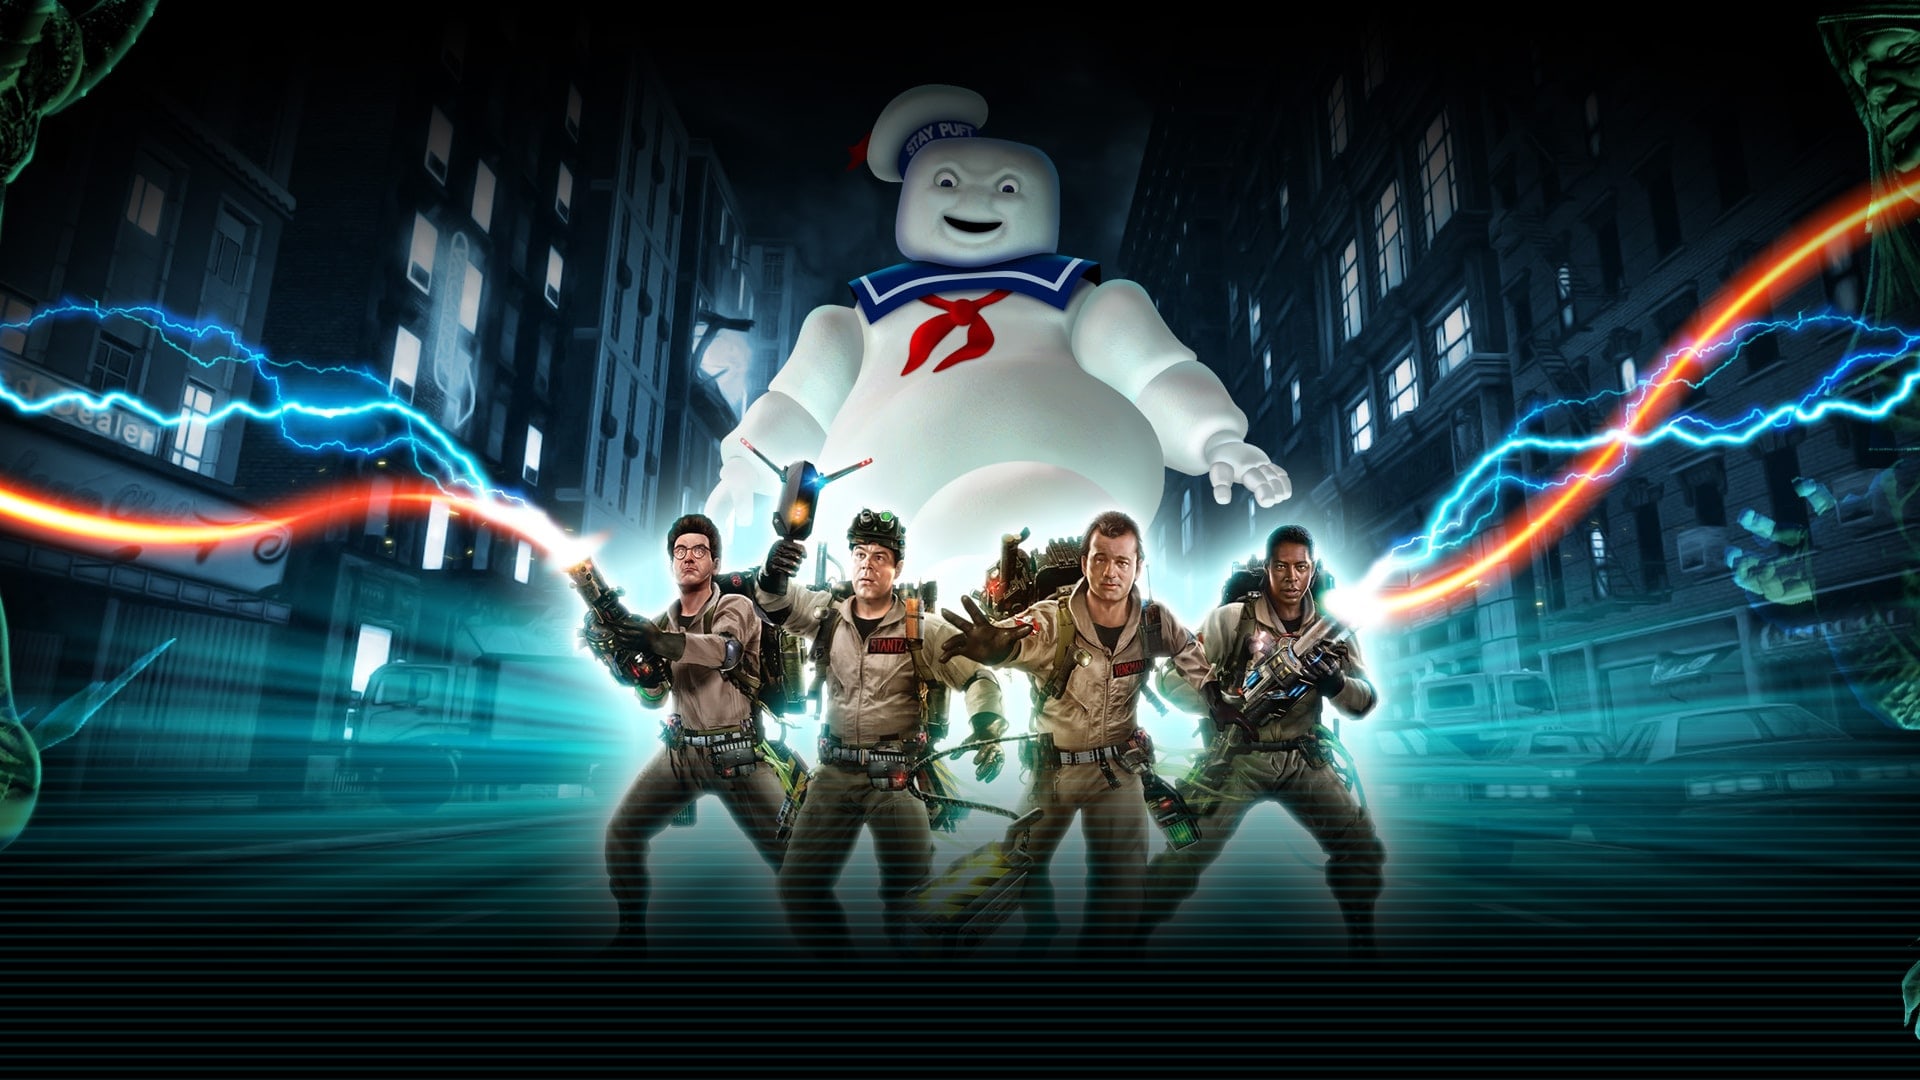 Discover more Comedy, Ghostbusters, Ghostbusters Background, Ghostbusters P...